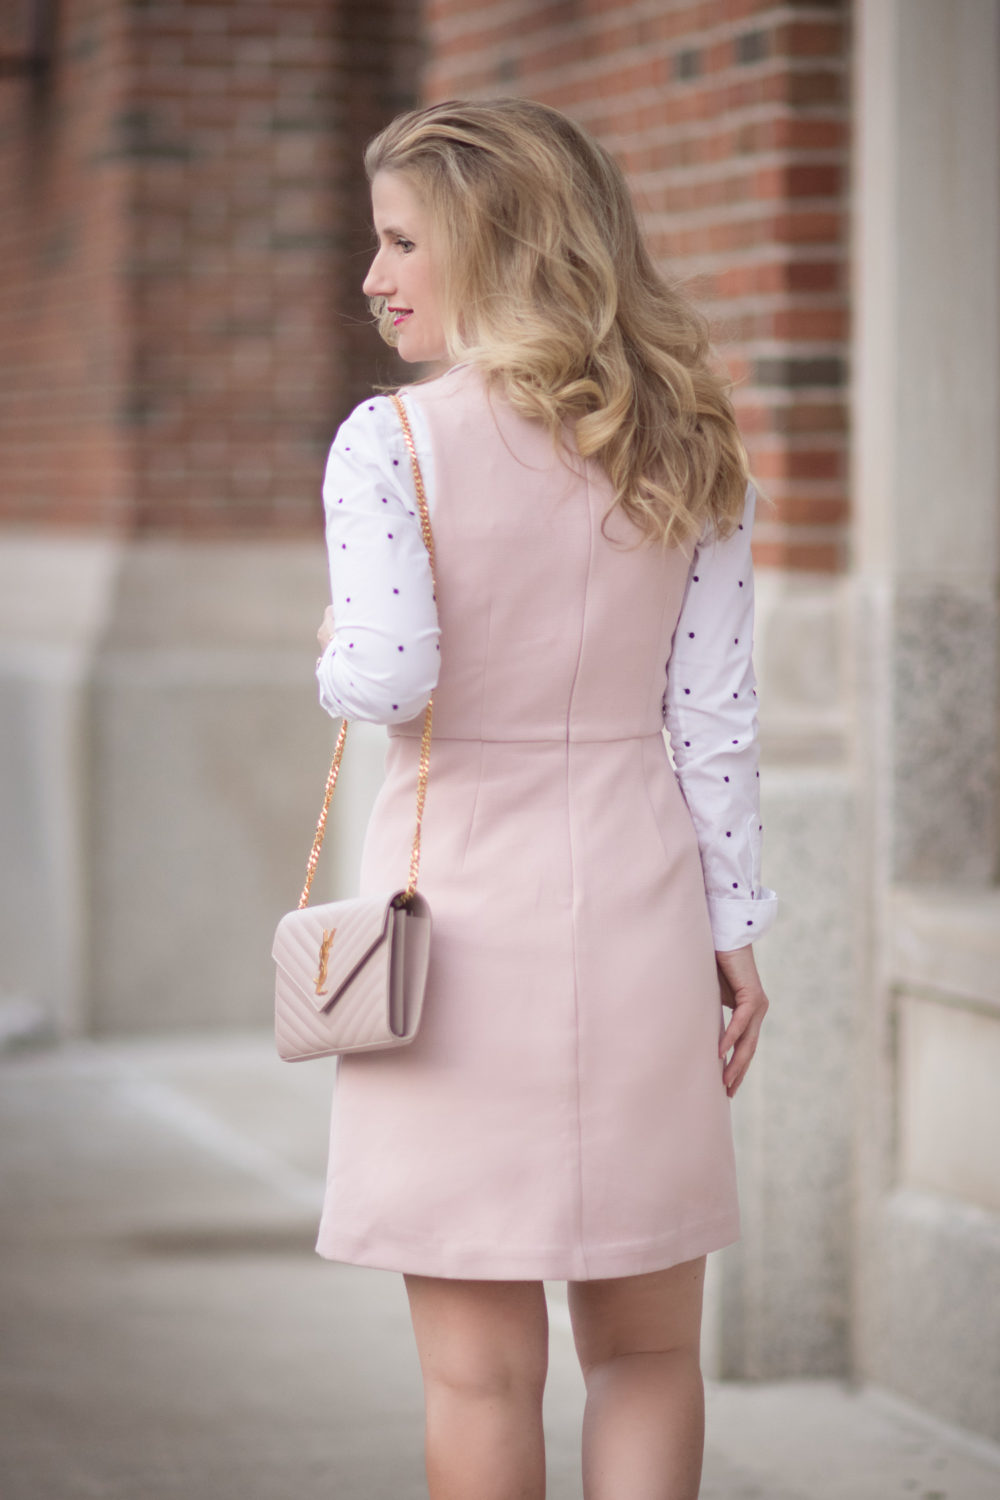 Petite Fashion and Style Blog | Fashion for Petite Women | Pink Sheath Dress | Polka Dot Blouse | YSL Wallet on Chain | How to Wear a Dress in the Winter |